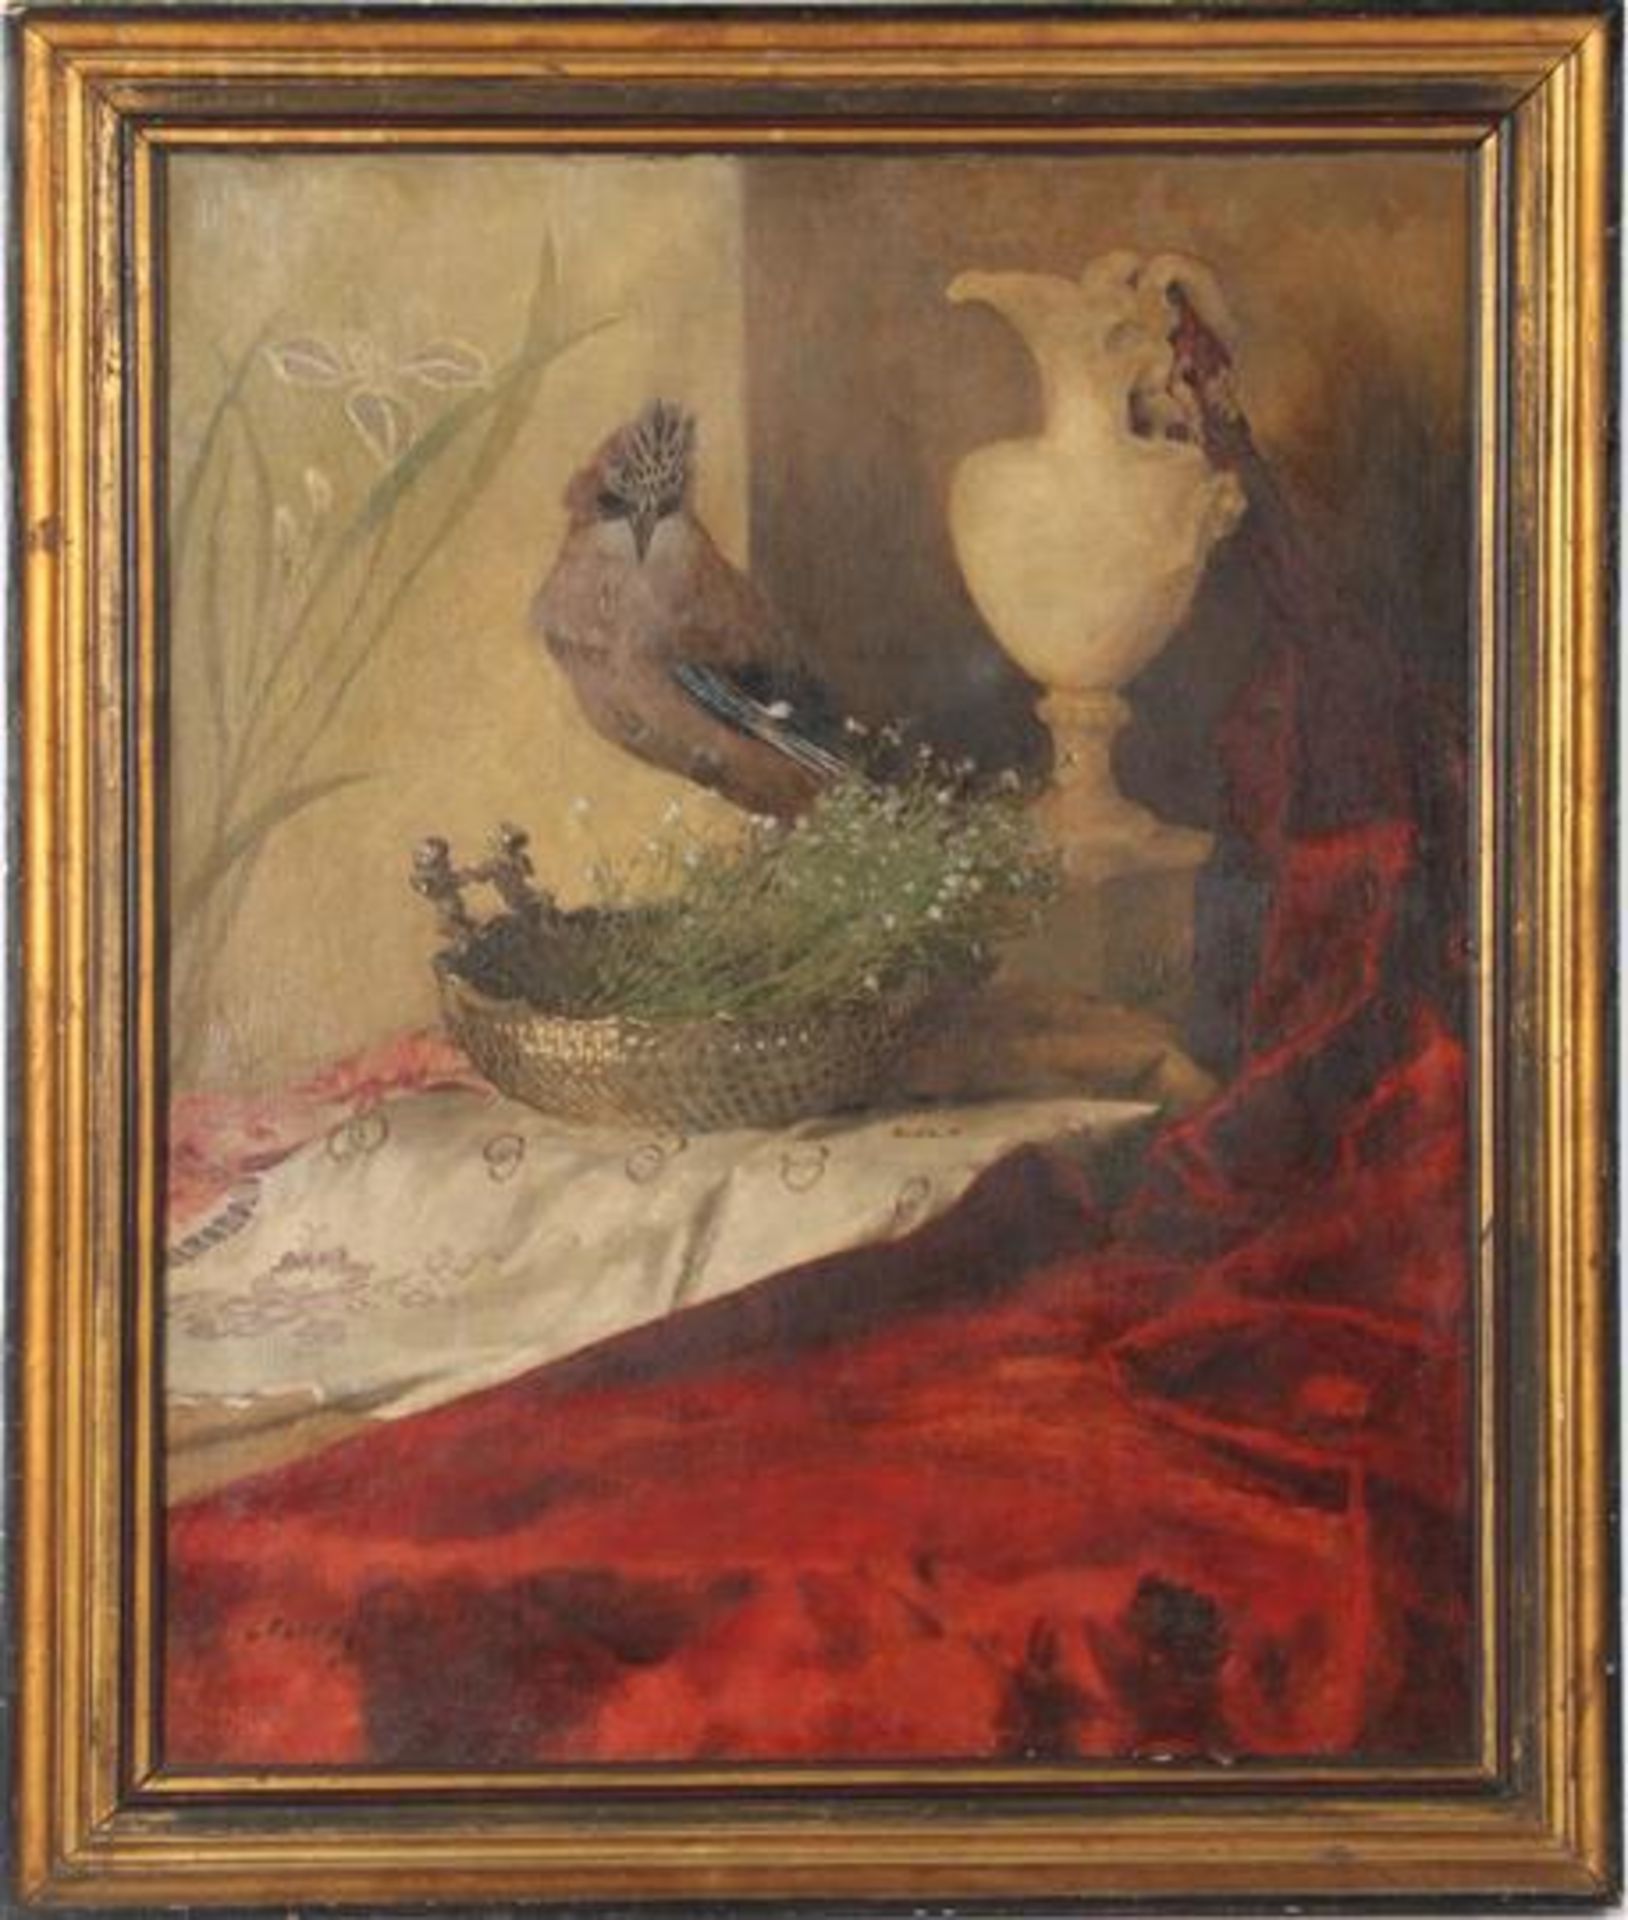 Unclearly signed, Still life with alabaster pitcher, bowl with herbs and stuffed Jay, canvas 69x56